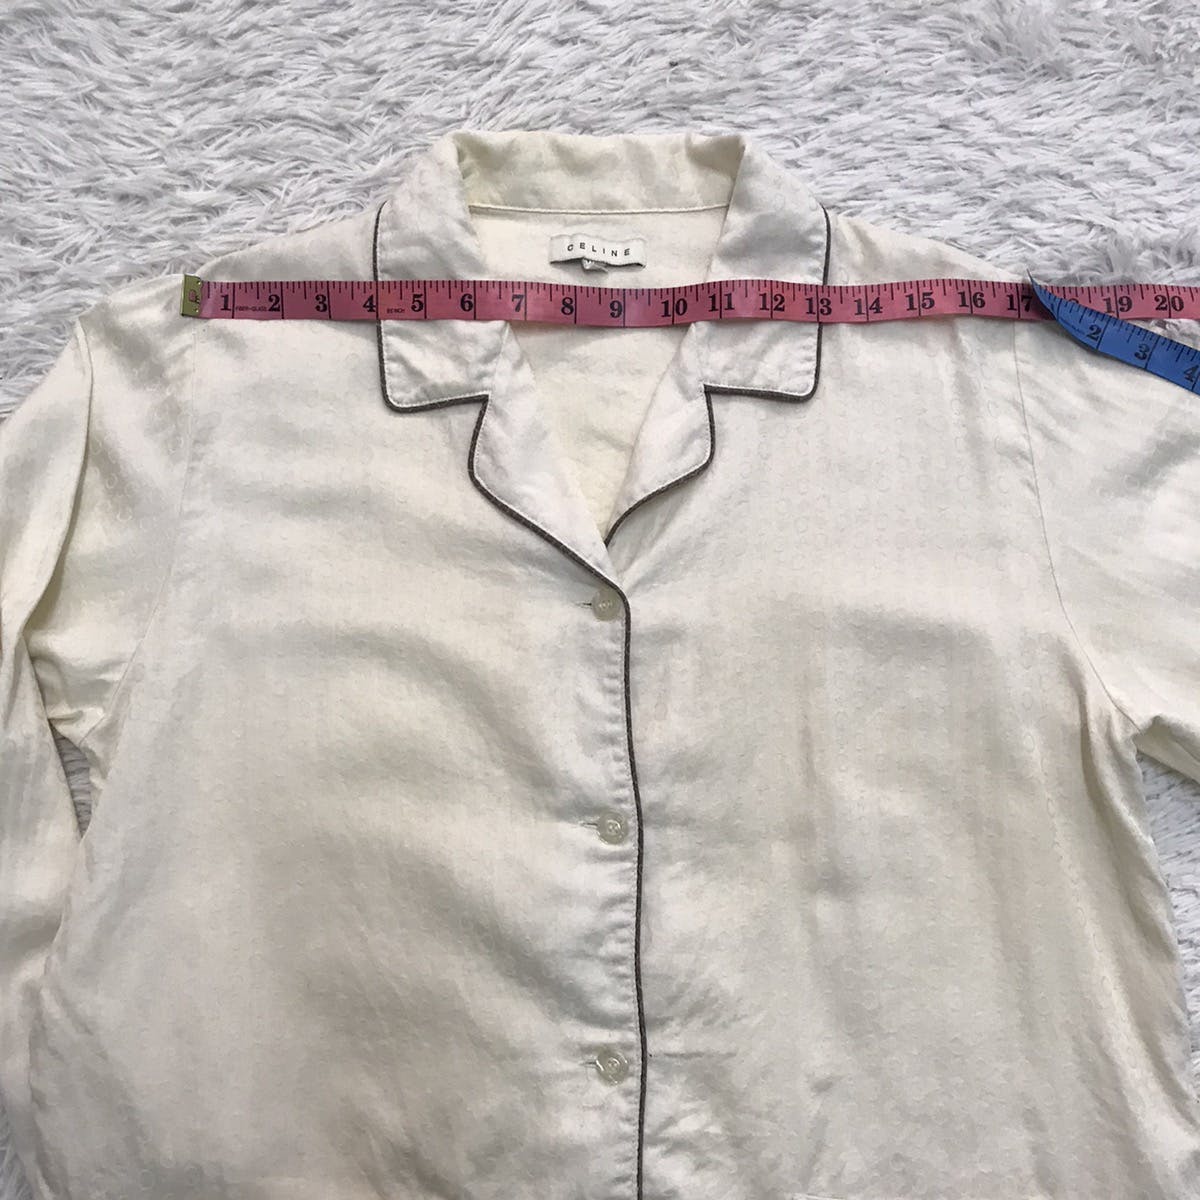 Celine button up shirt made in Japan - 5